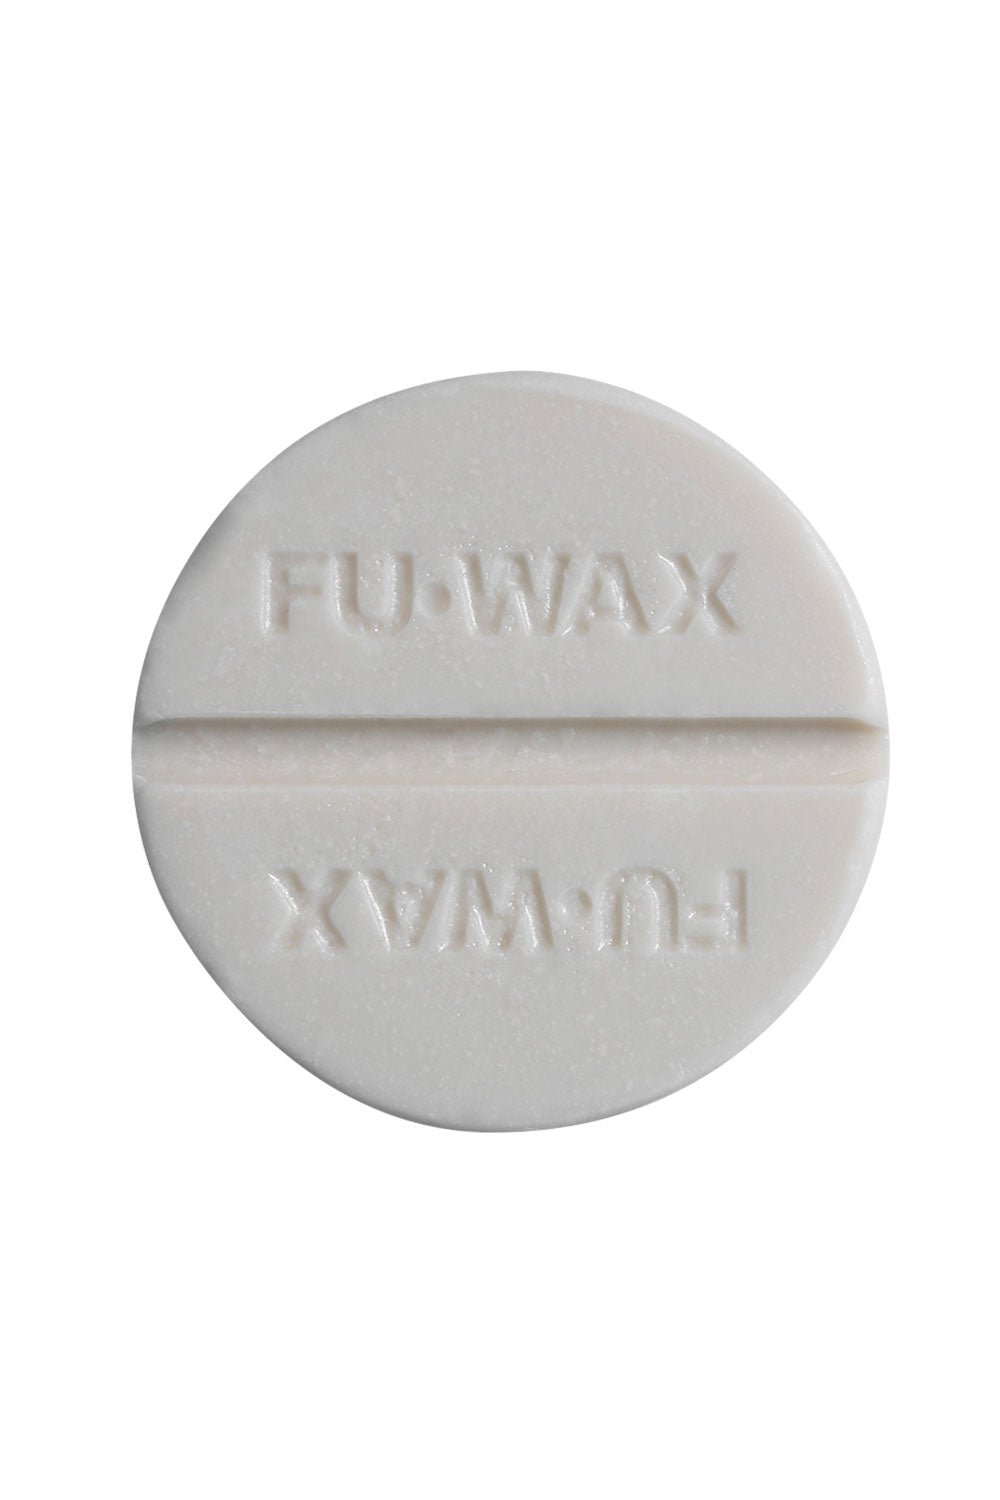 Fu Wax for Surfing